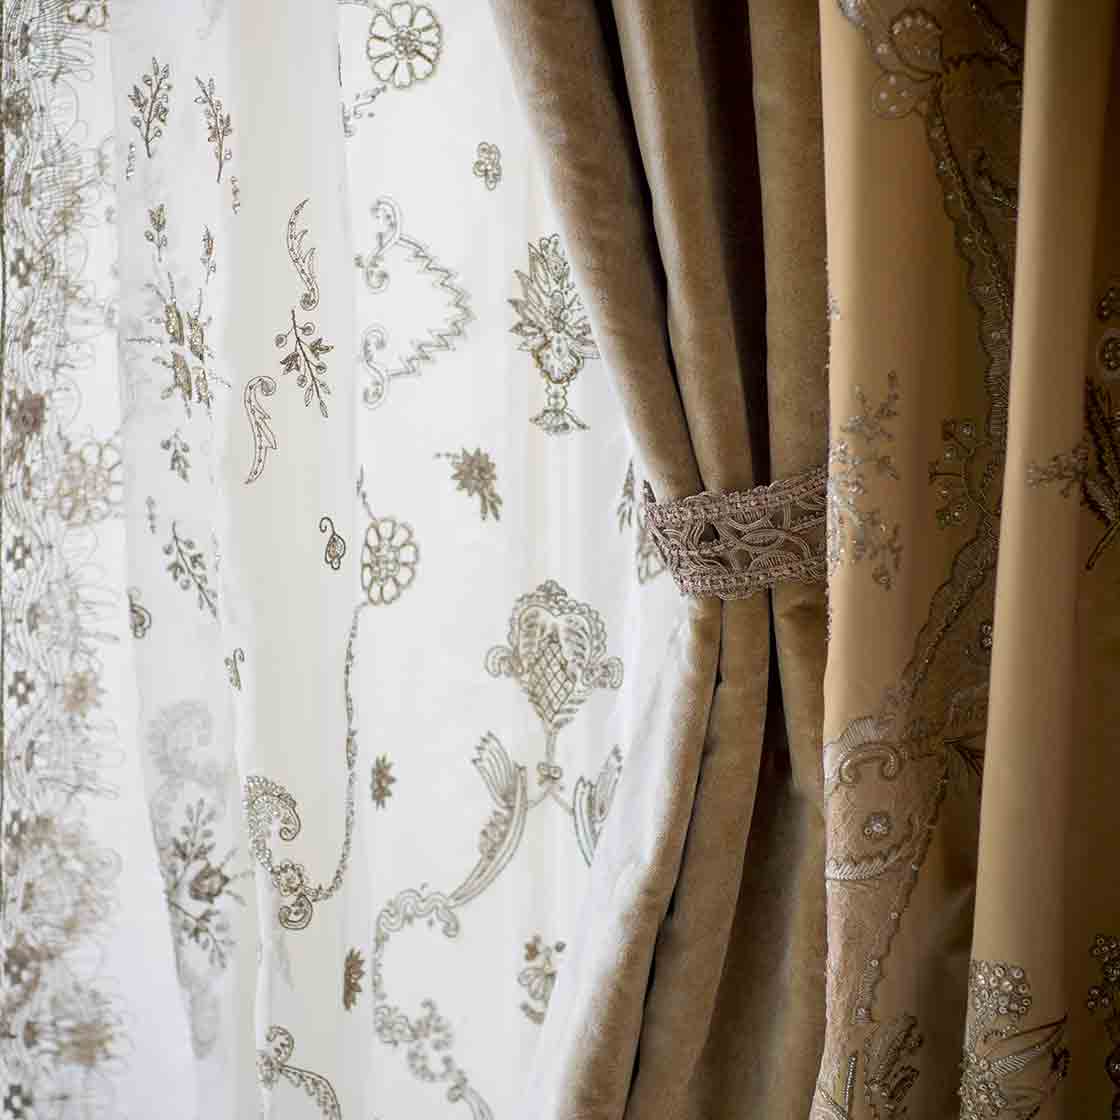 Tagore embroidery on drapes in Organza - Beaumont & Fletcher